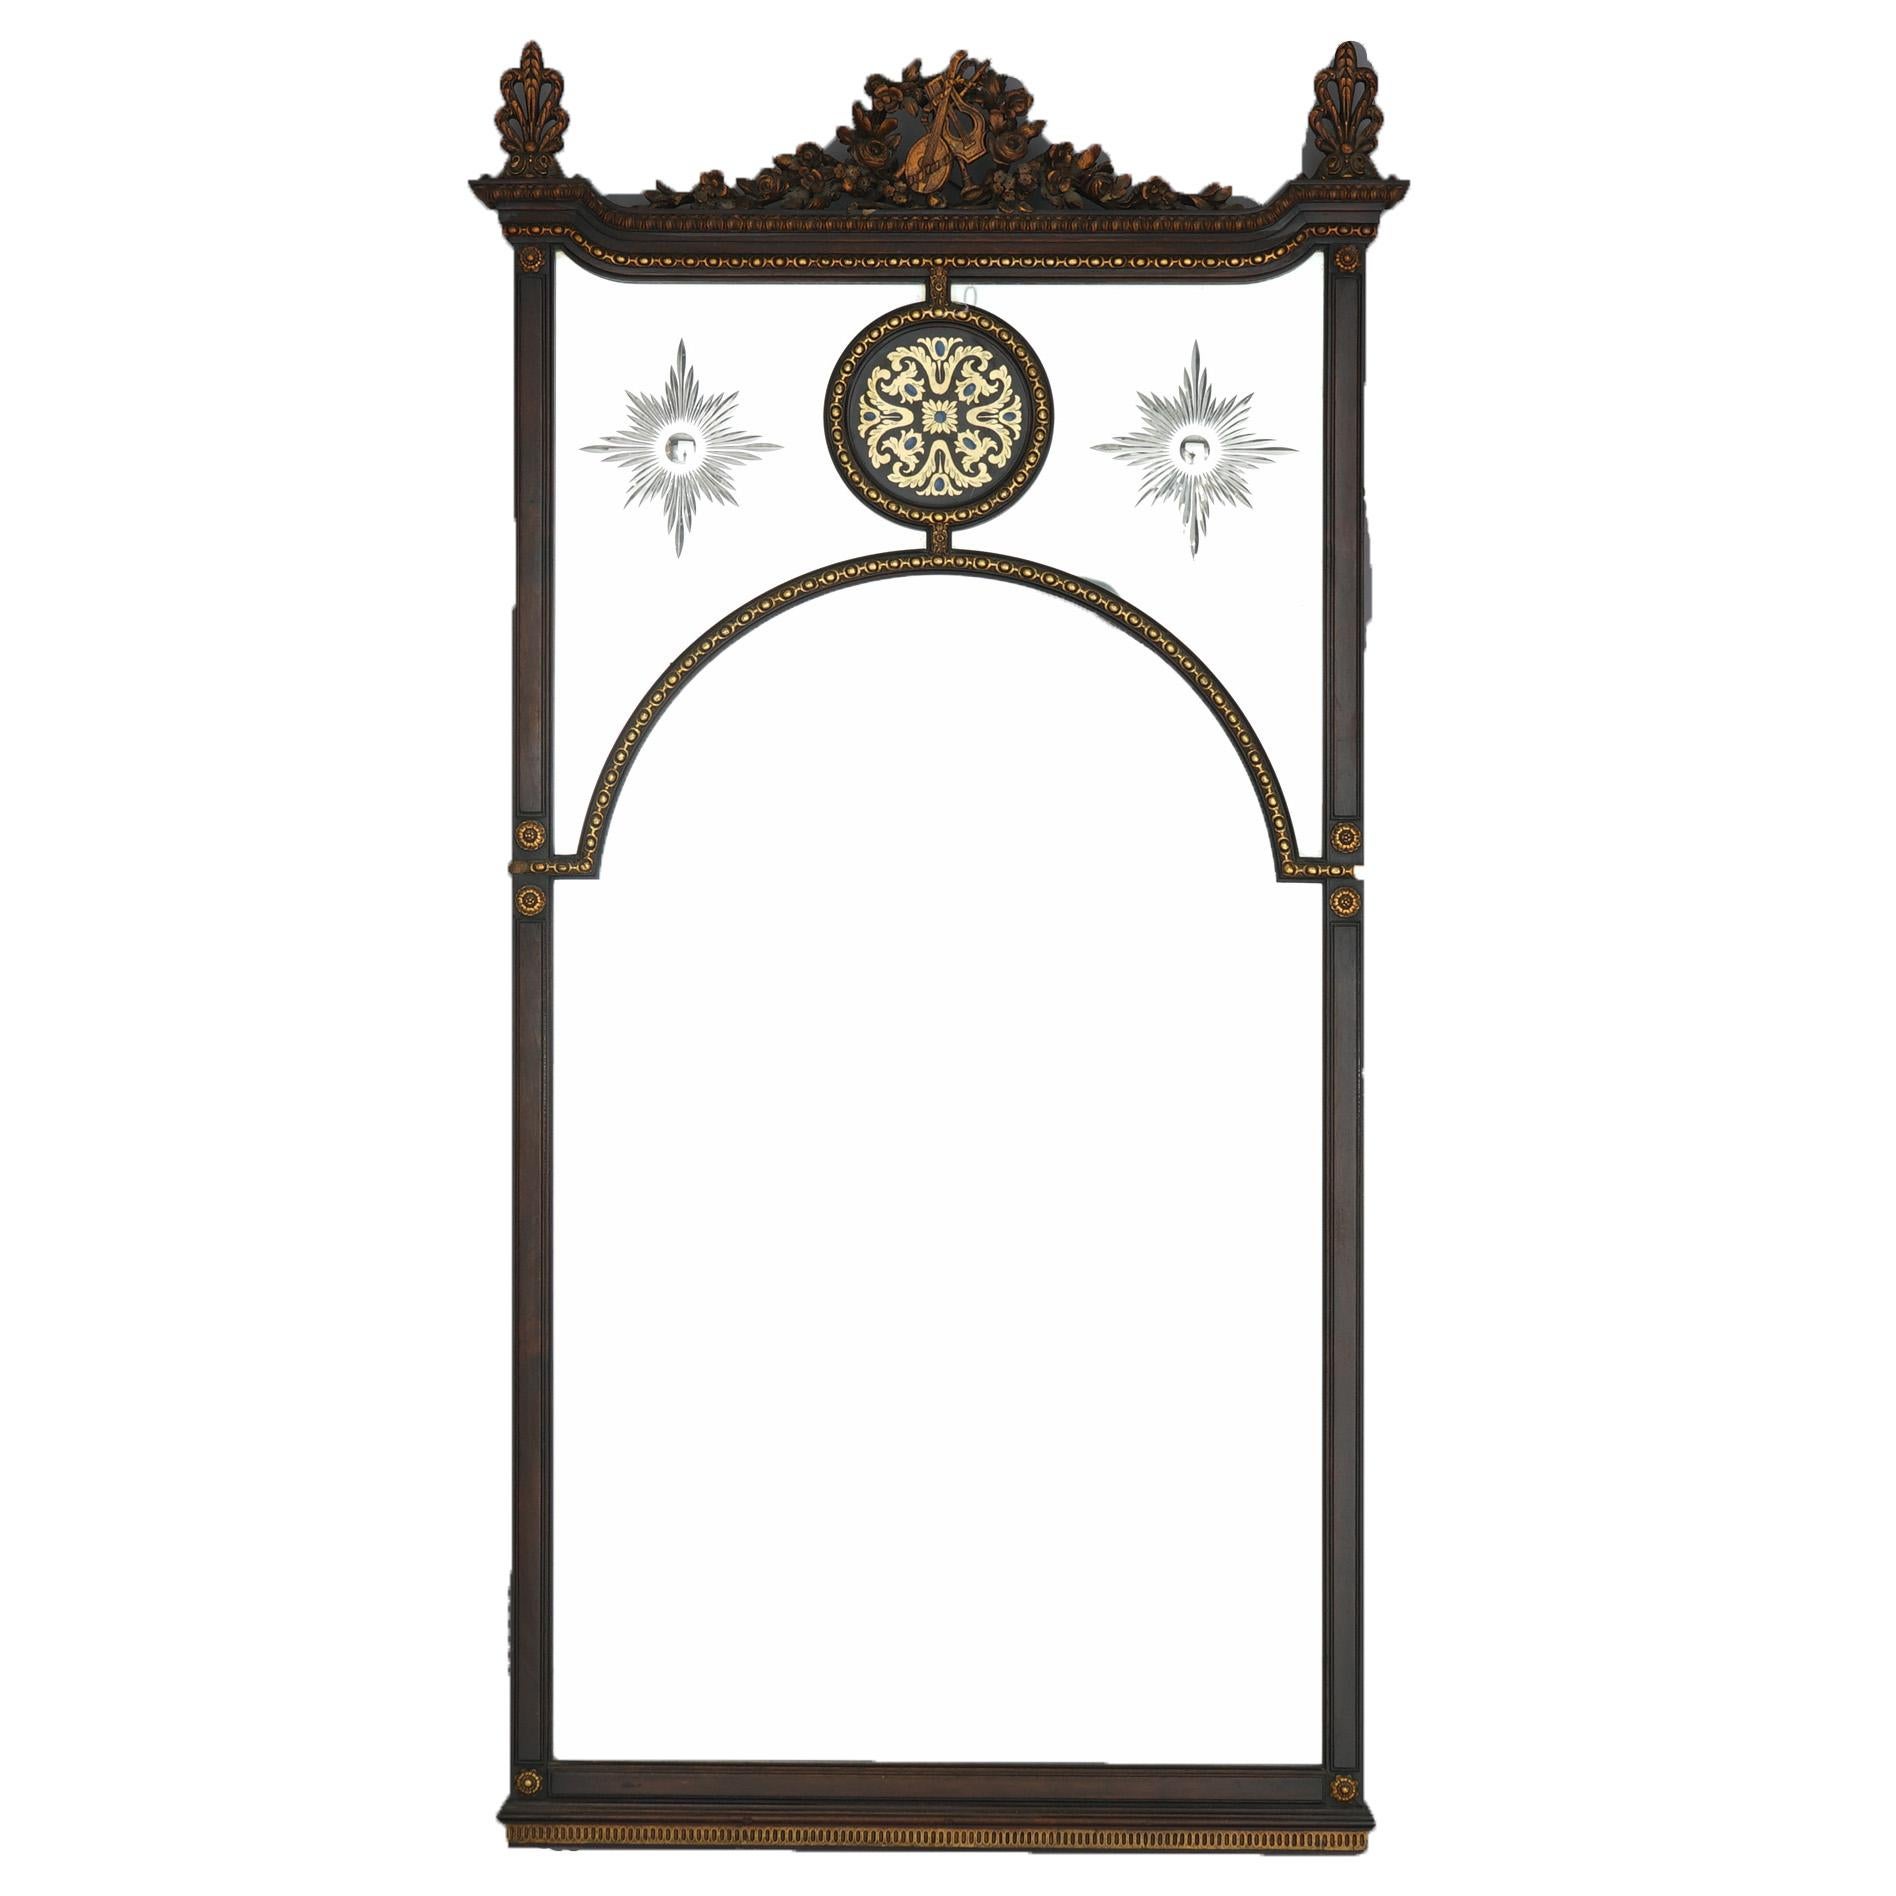 Large antique Venetian wall mirror offers paint decorated mahogany frame with carved foliate crest having central musical instruments (lute, lyre and clarinet) with flanking stylized palmette finials over paneled mirror with foliate medallion